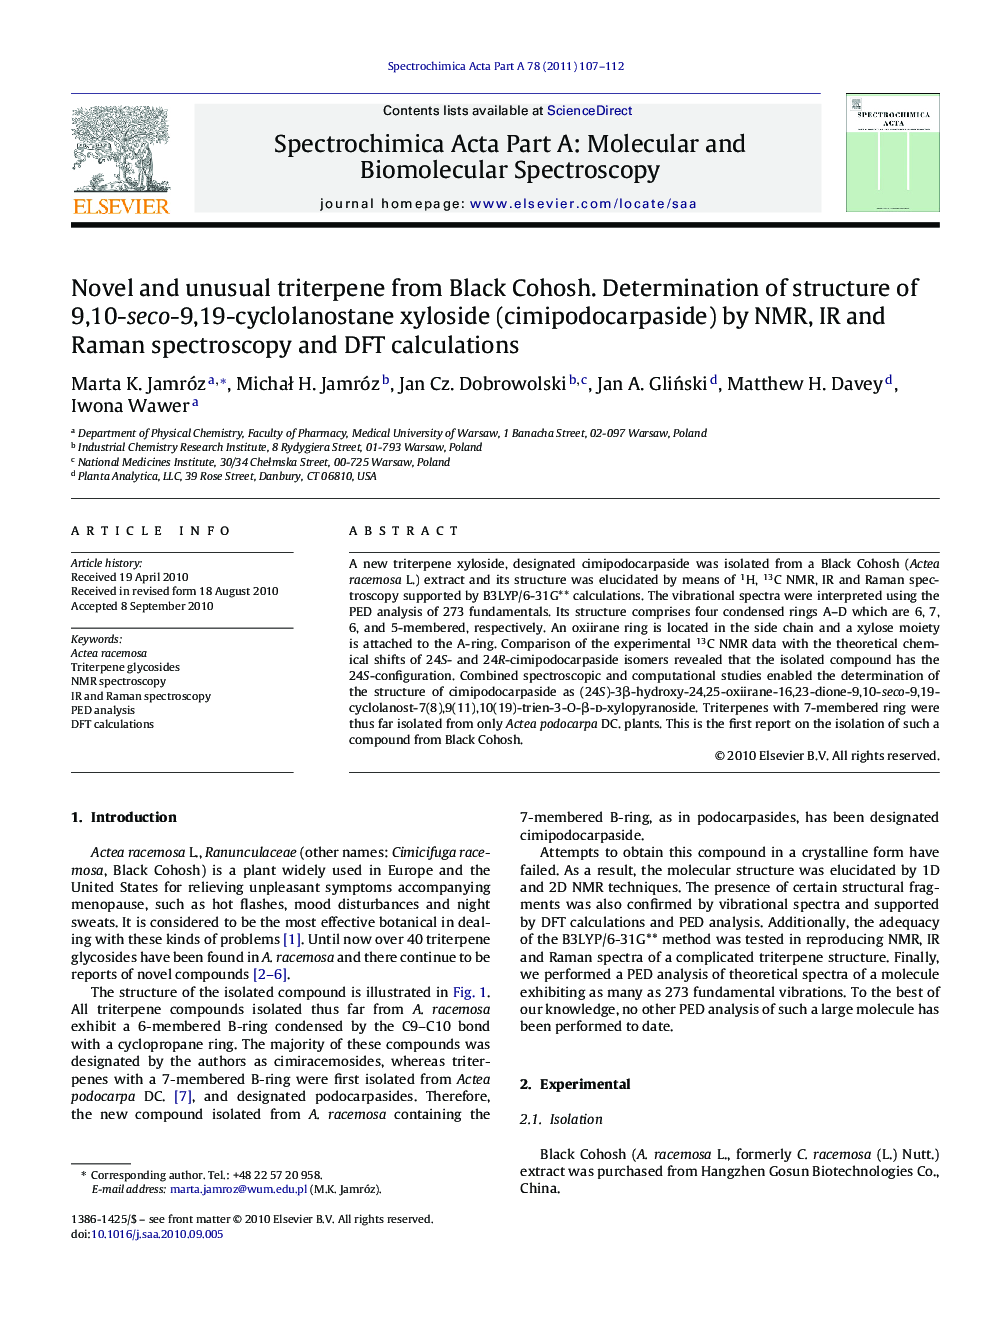 Novel and unusual triterpene from Black Cohosh. Determination of structure of 9,10-seco-9,19-cyclolanostane xyloside (cimipodocarpaside) by NMR, IR and Raman spectroscopy and DFT calculations